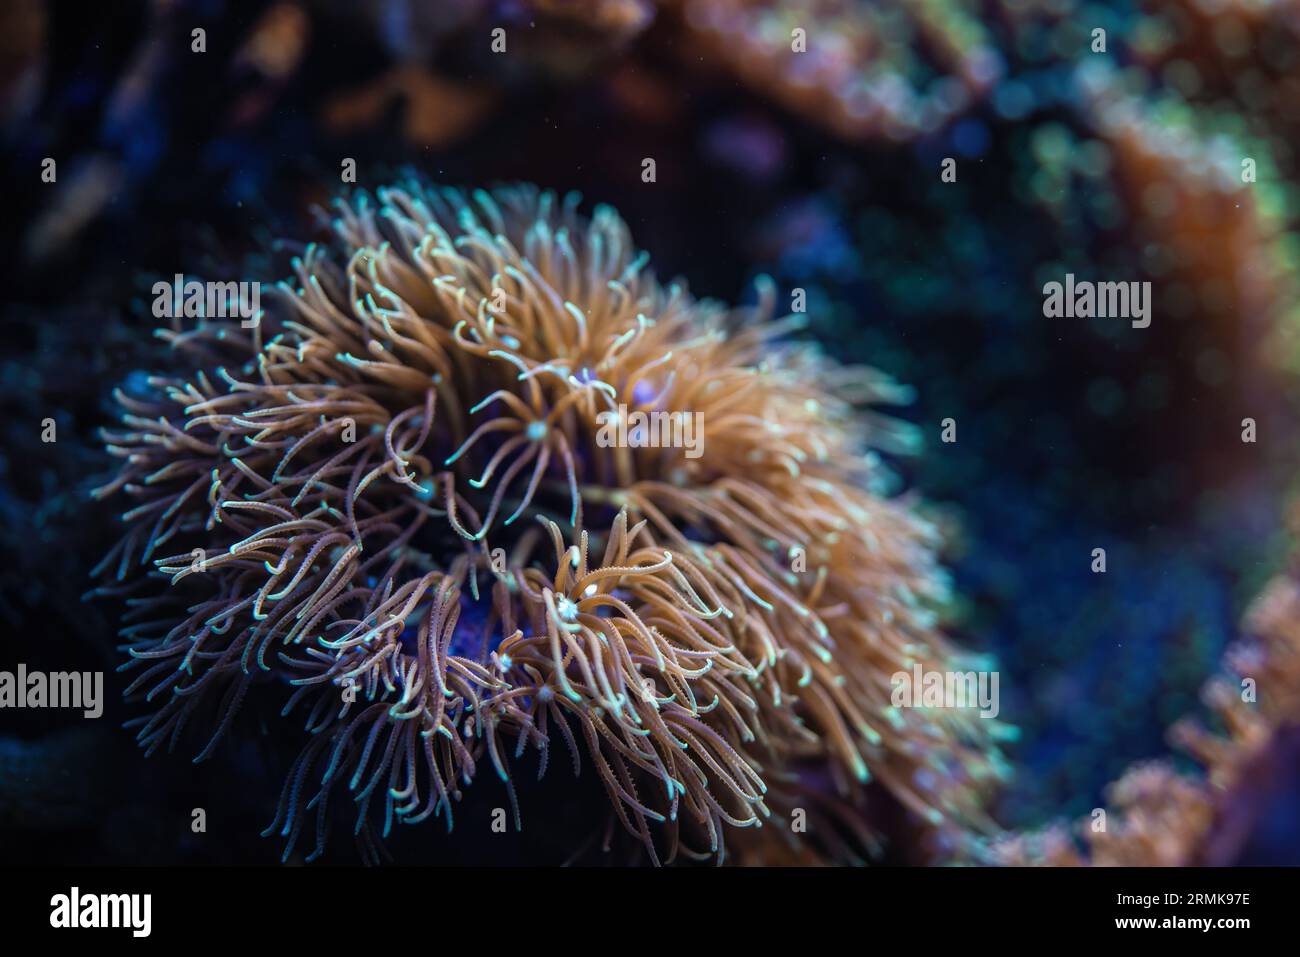 Underwater photo - soft coral with tentacles, Pachyclavularia species, emitting under UV light, beautiful abstract marine organic background Stock Photo